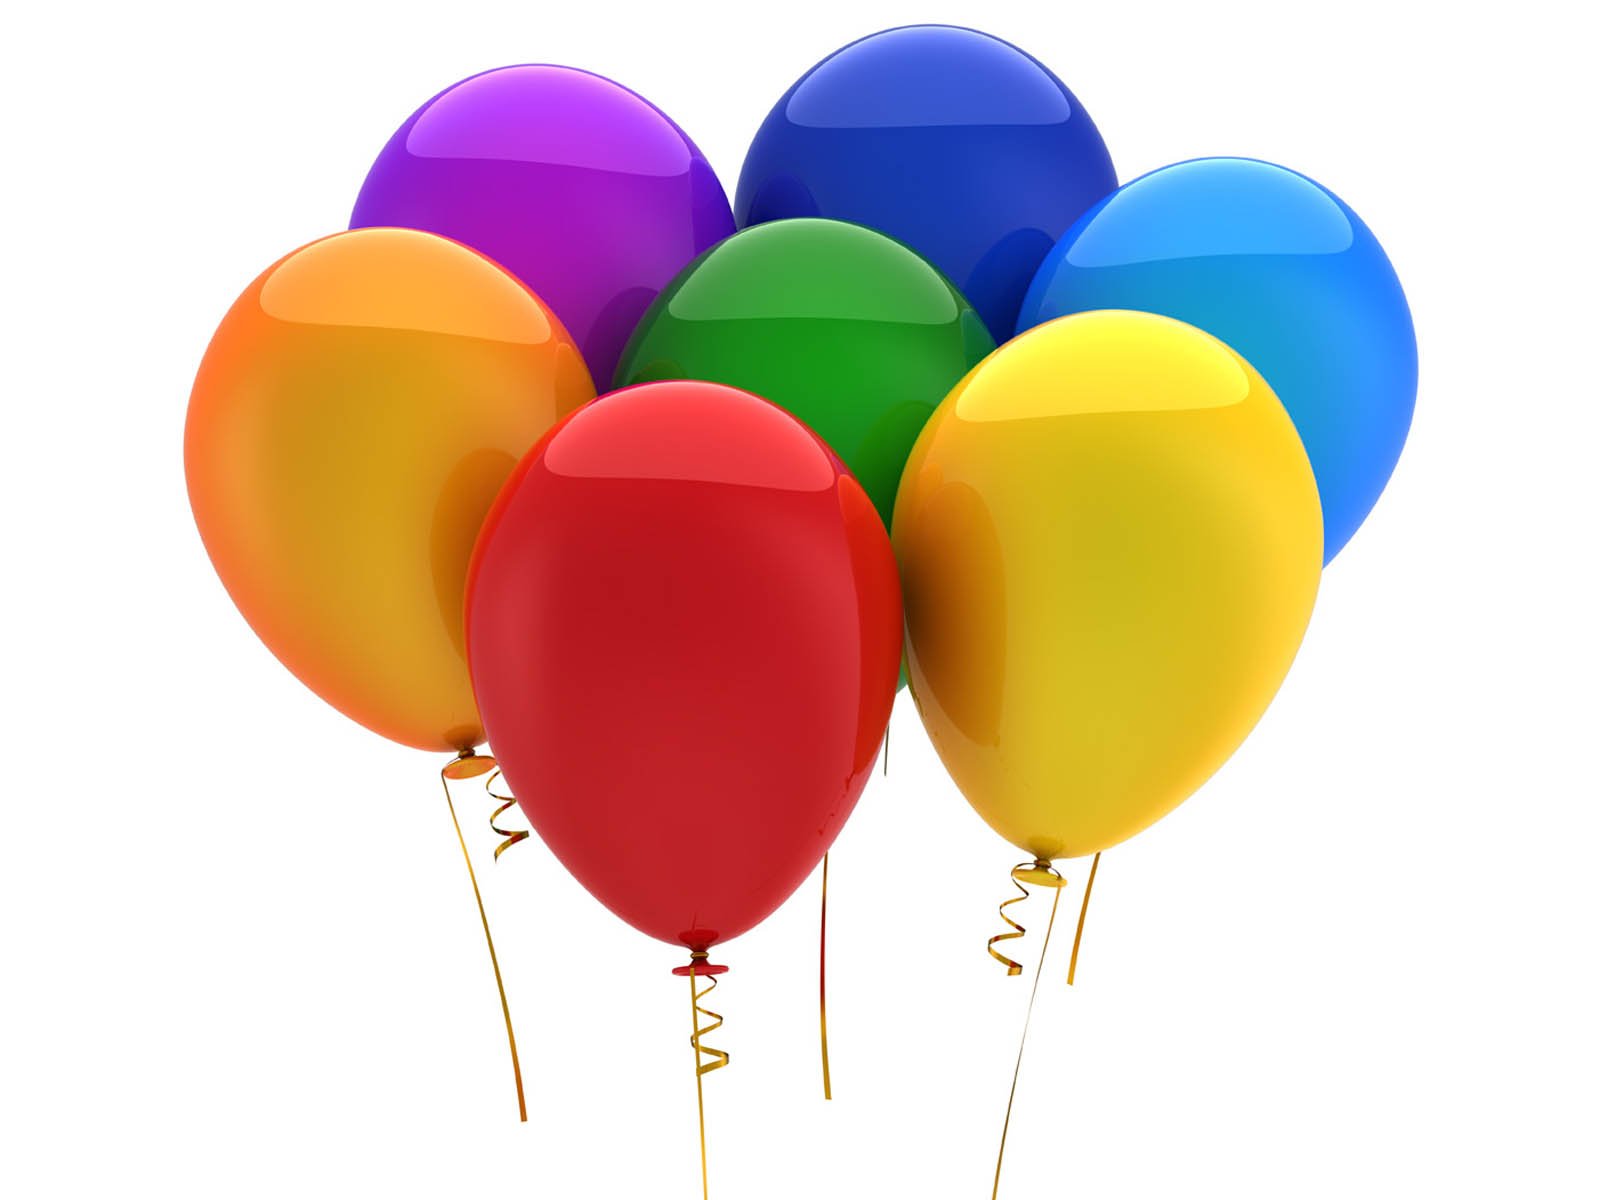  Balloons Wallpapers Images Photos Pictures and Backgrounds for free